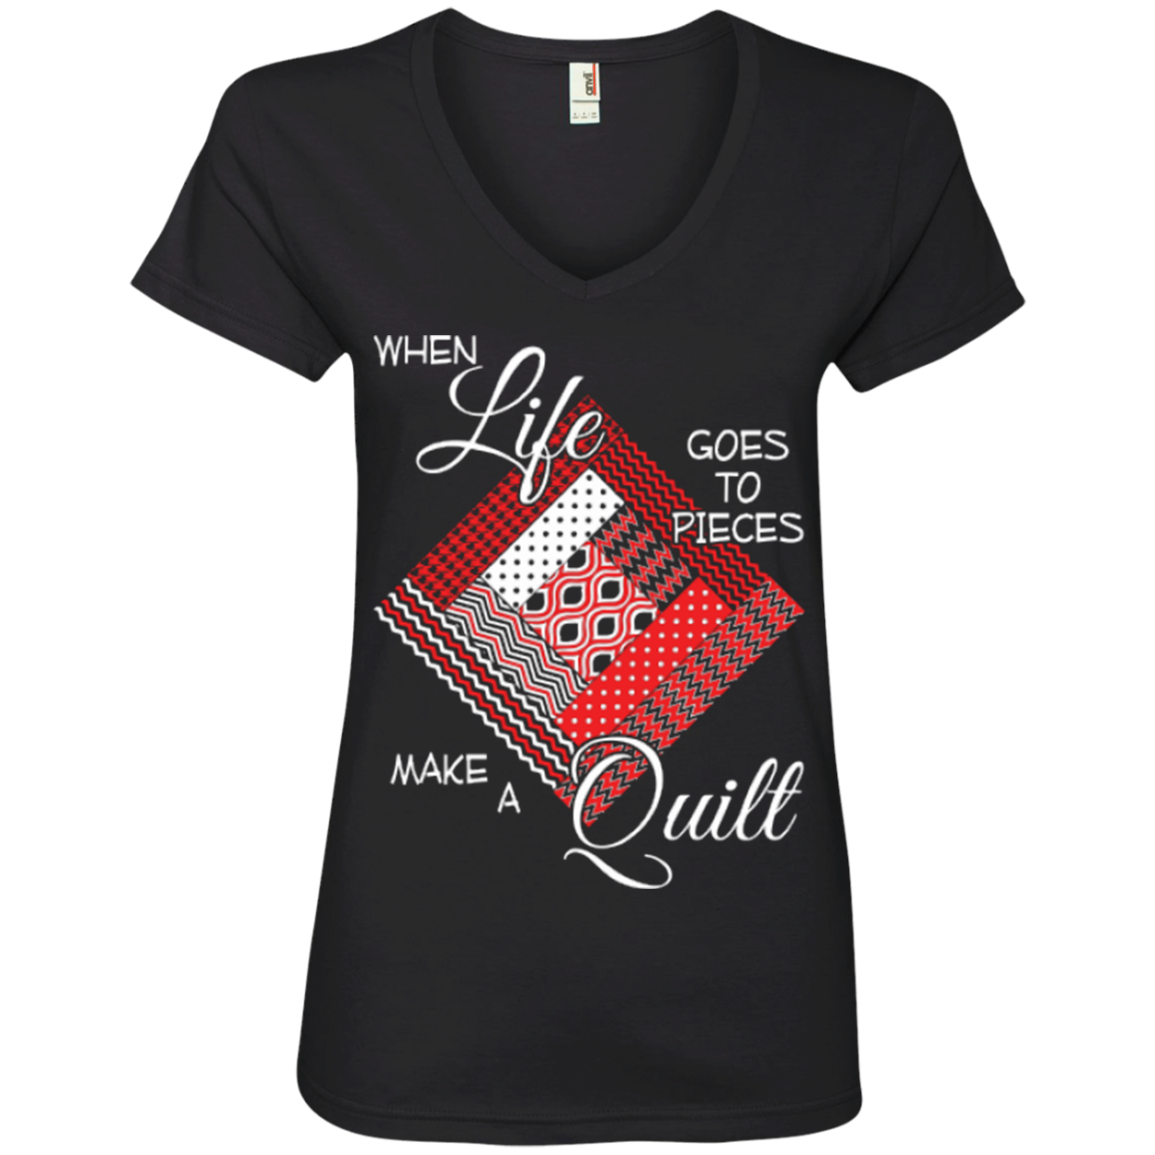 Make a Quilt (red) Ladies V-Neck Tee - Crafter4Life - 3